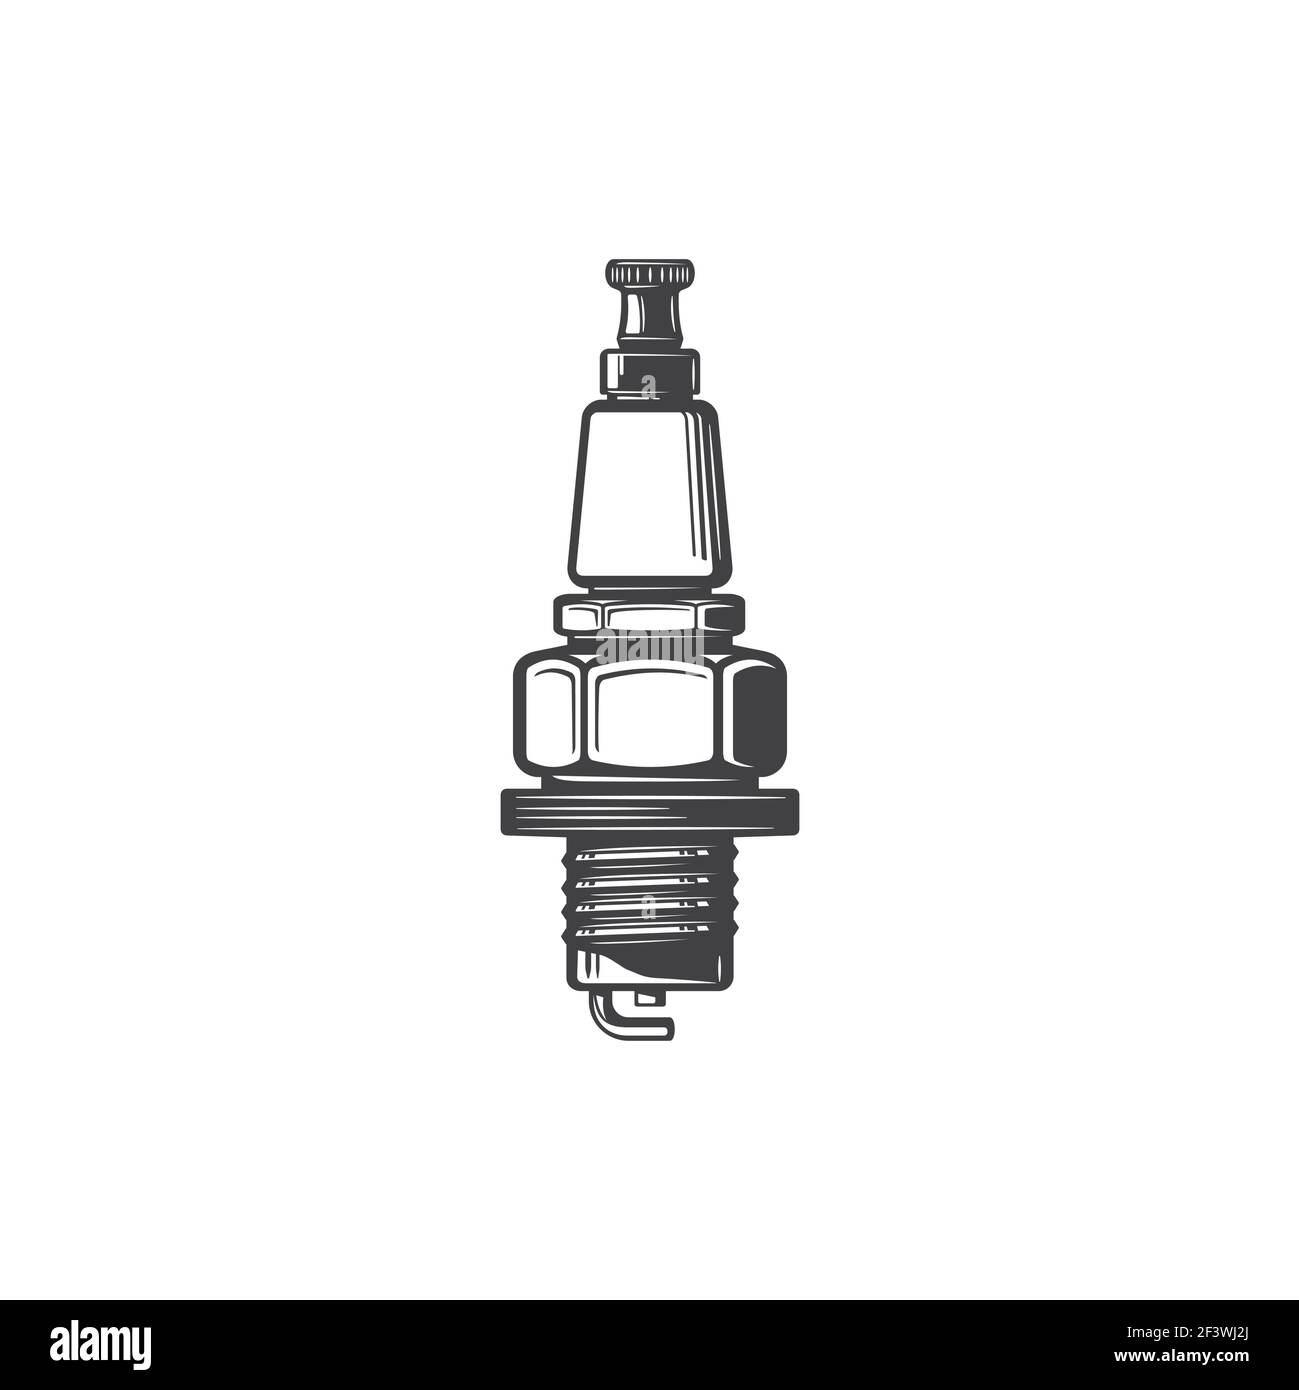 Spark plug of internal combustion candle, automotive maintenance sign isolated monochrome icon. Vector parking plug delivering electric current in veh Stock Vector